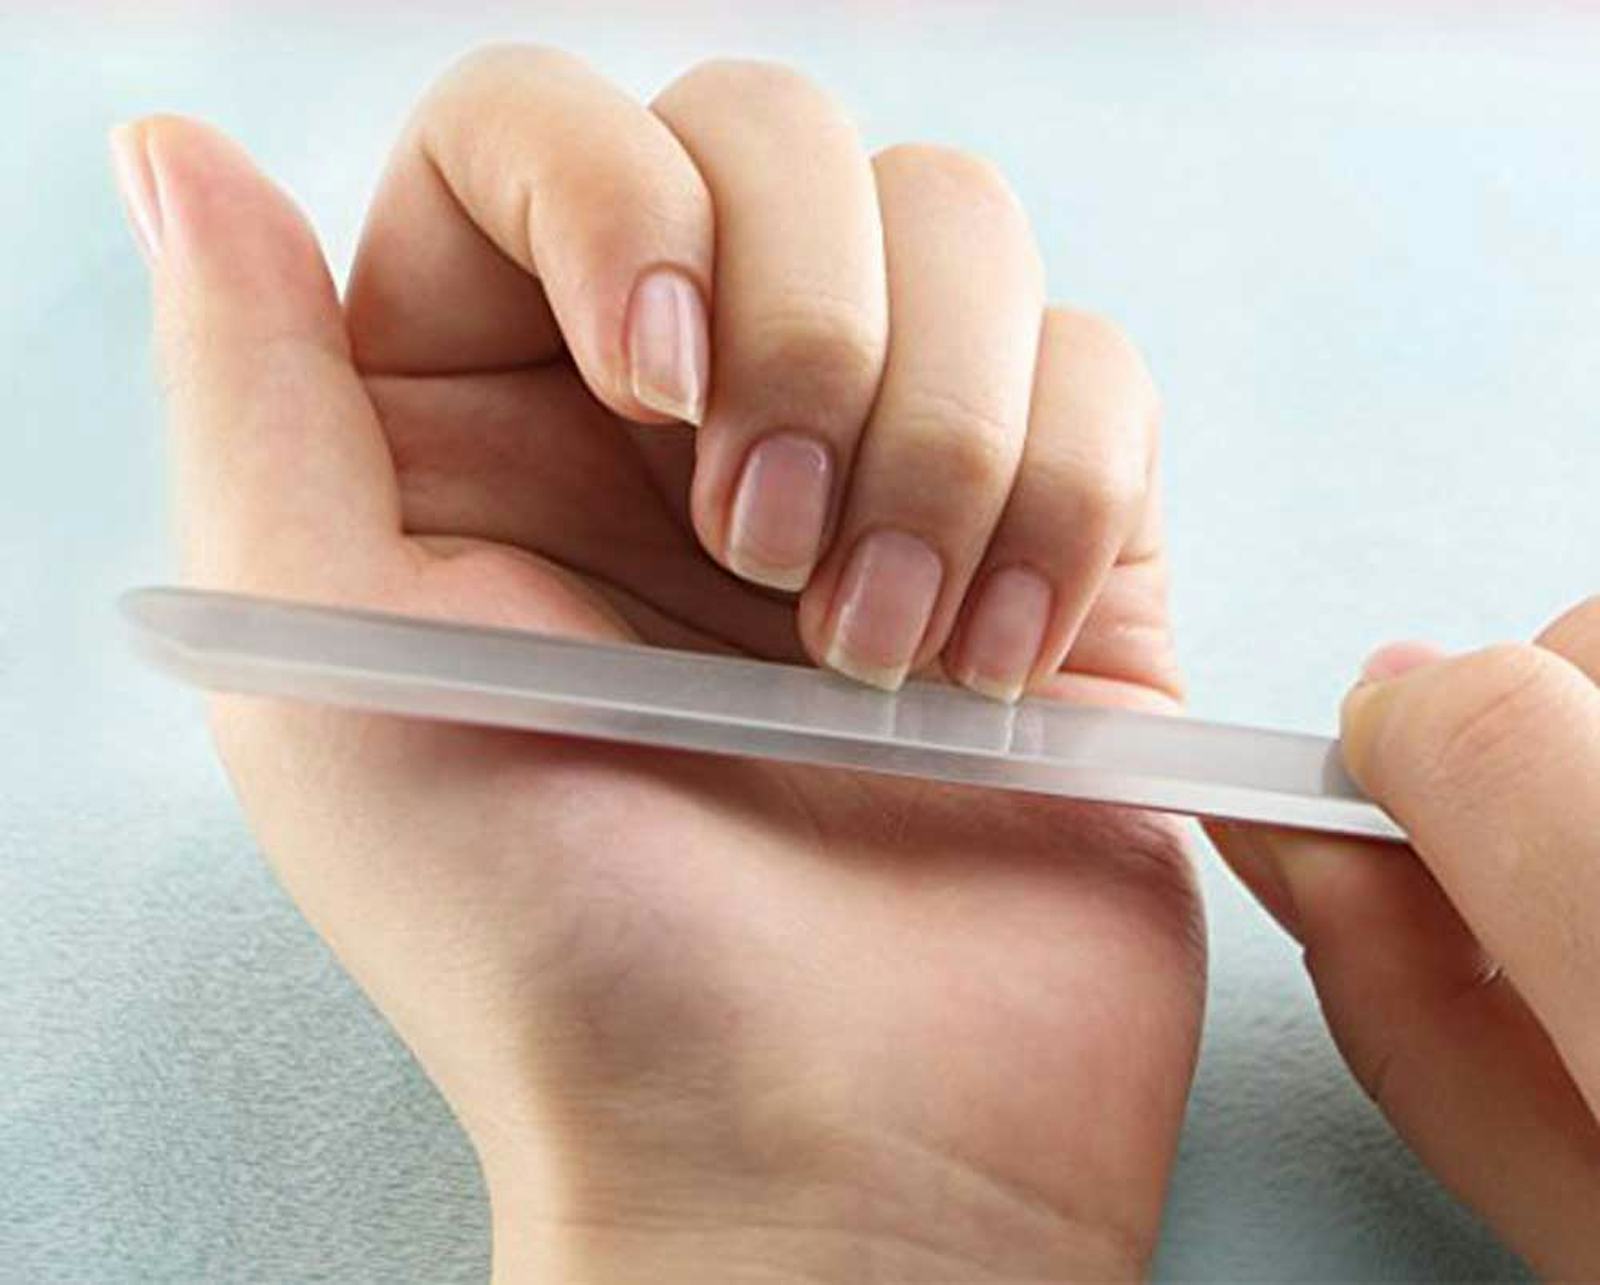 2. Nail File Designs for Girls with Long Nails - wide 6